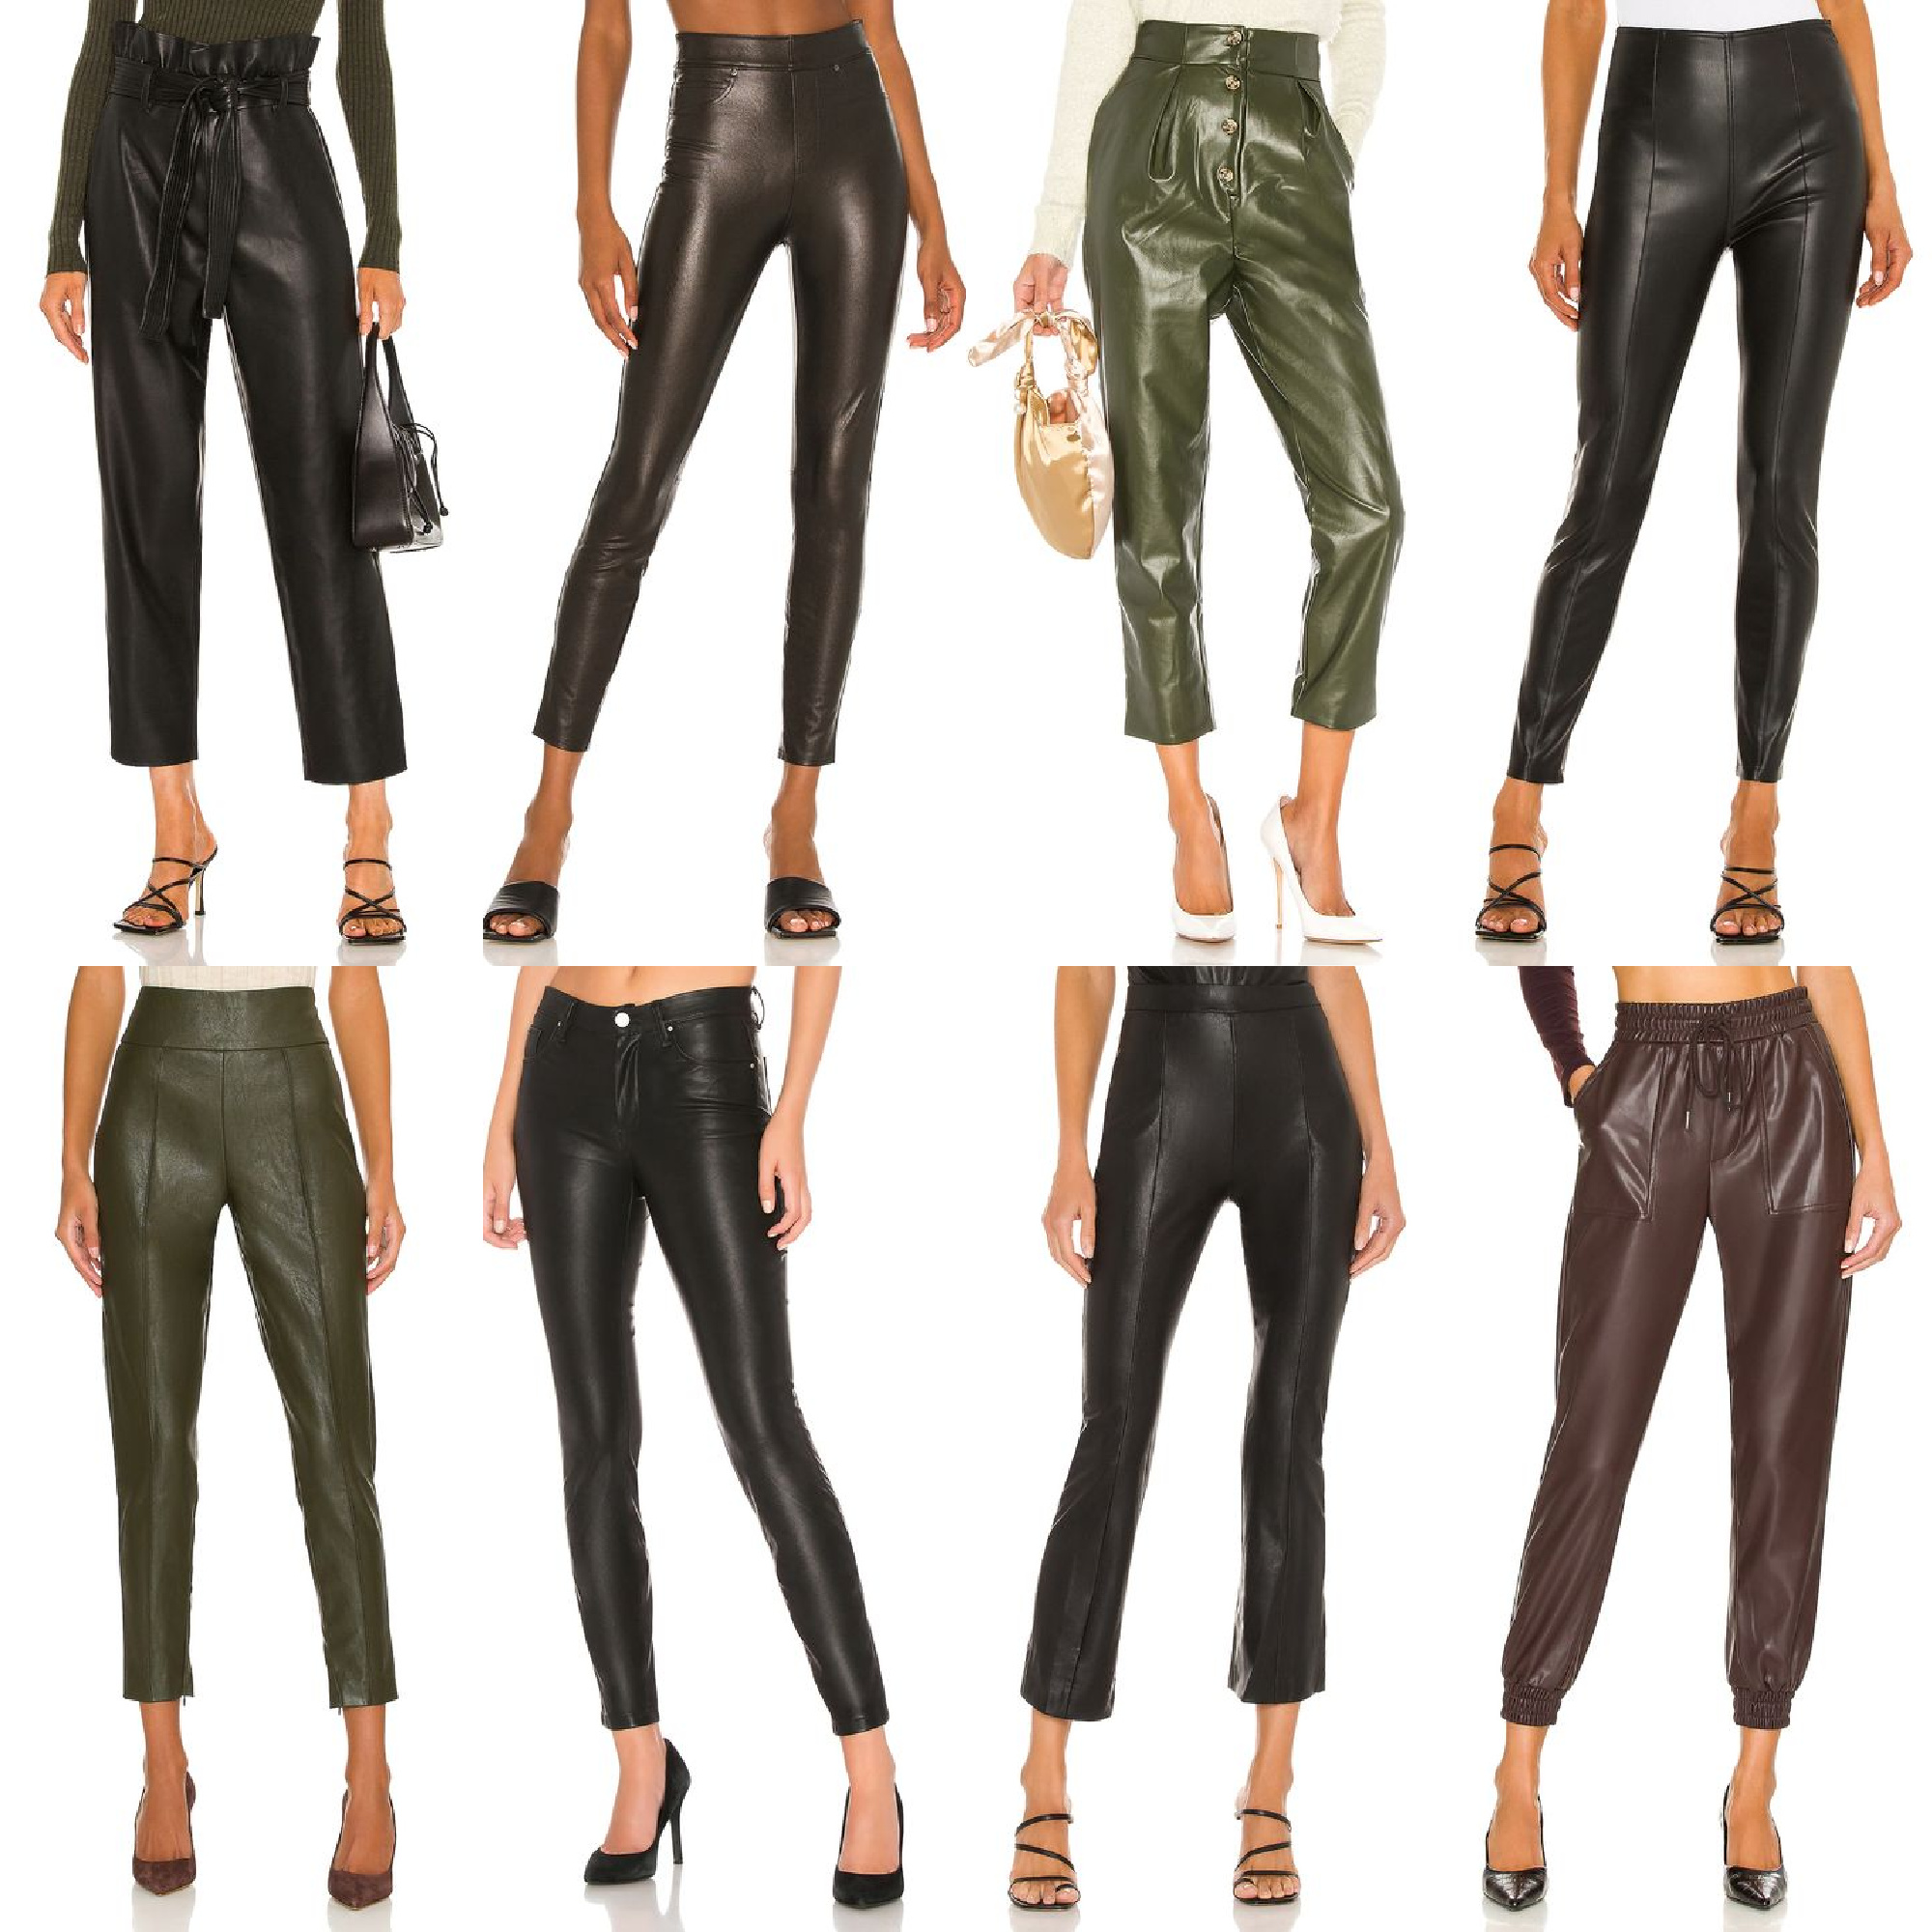 On Trend For Fall: Faux Leather Pants - alittlebitetc